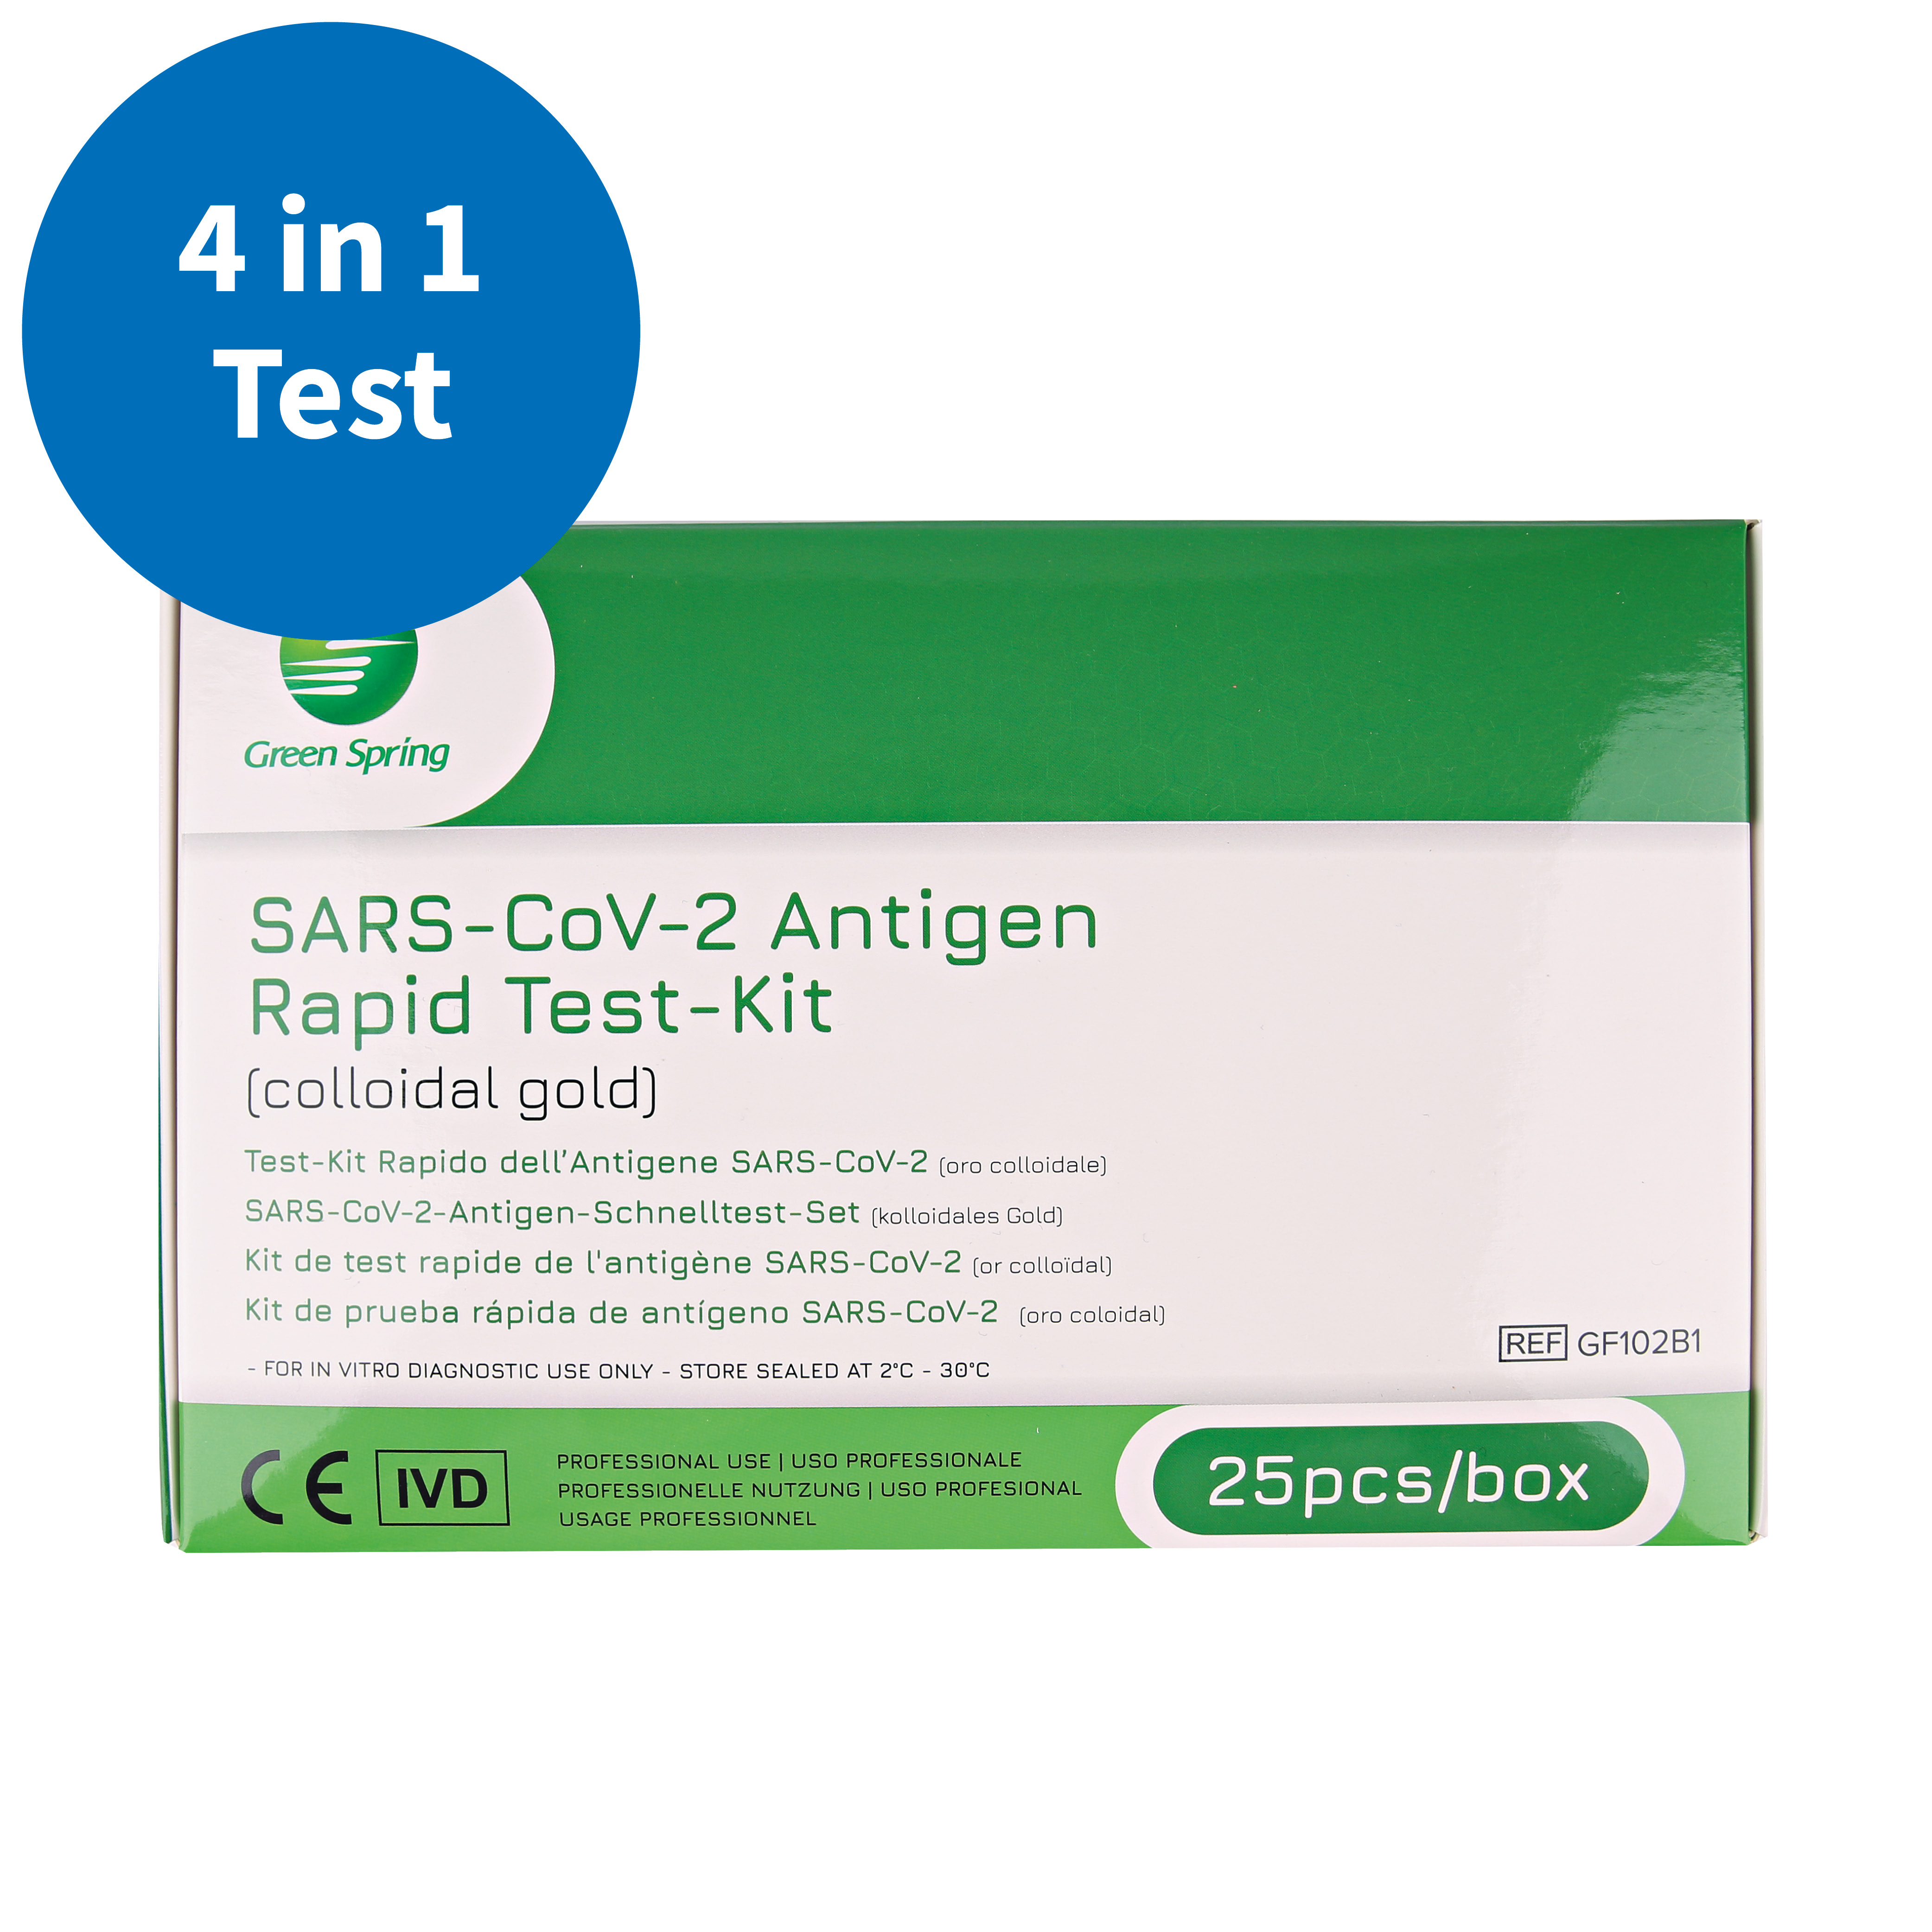 Green Spring SARS-CoV-2 antigen rapid test kit (colloidal gold) in top view with 4 in 1 - button